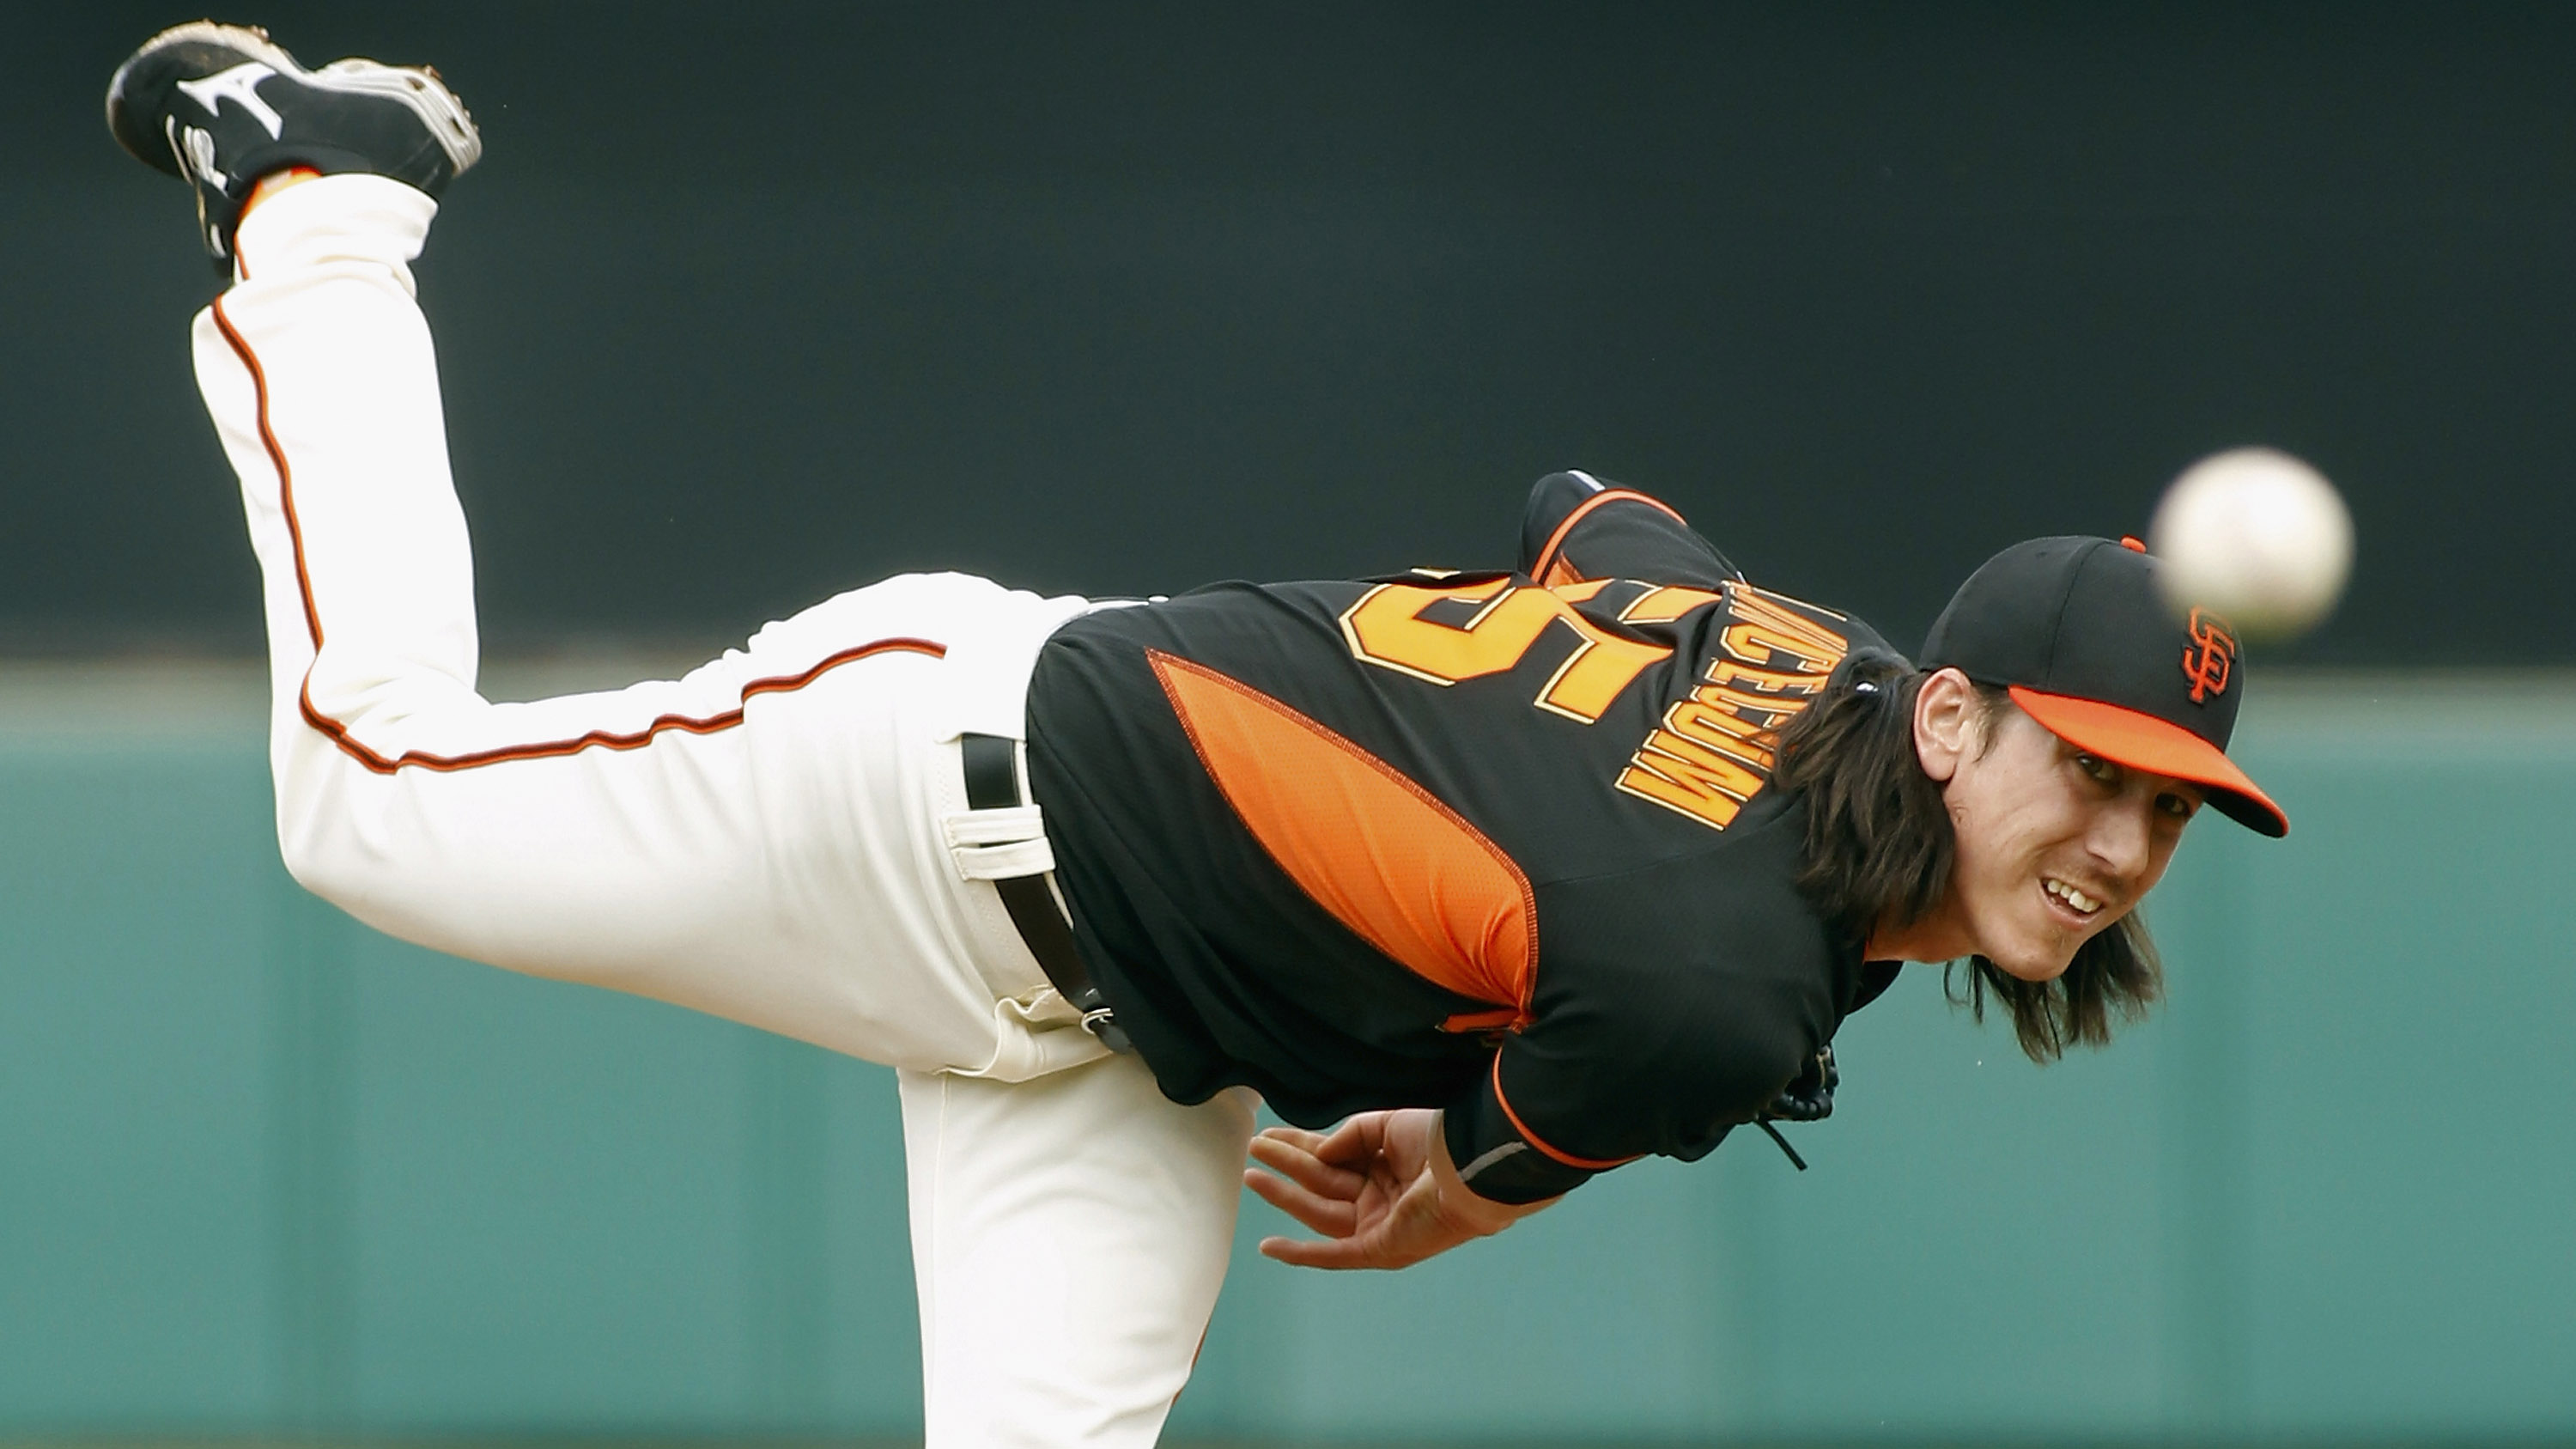 Tim Lincecum signing with Rangers delayed due to death in his